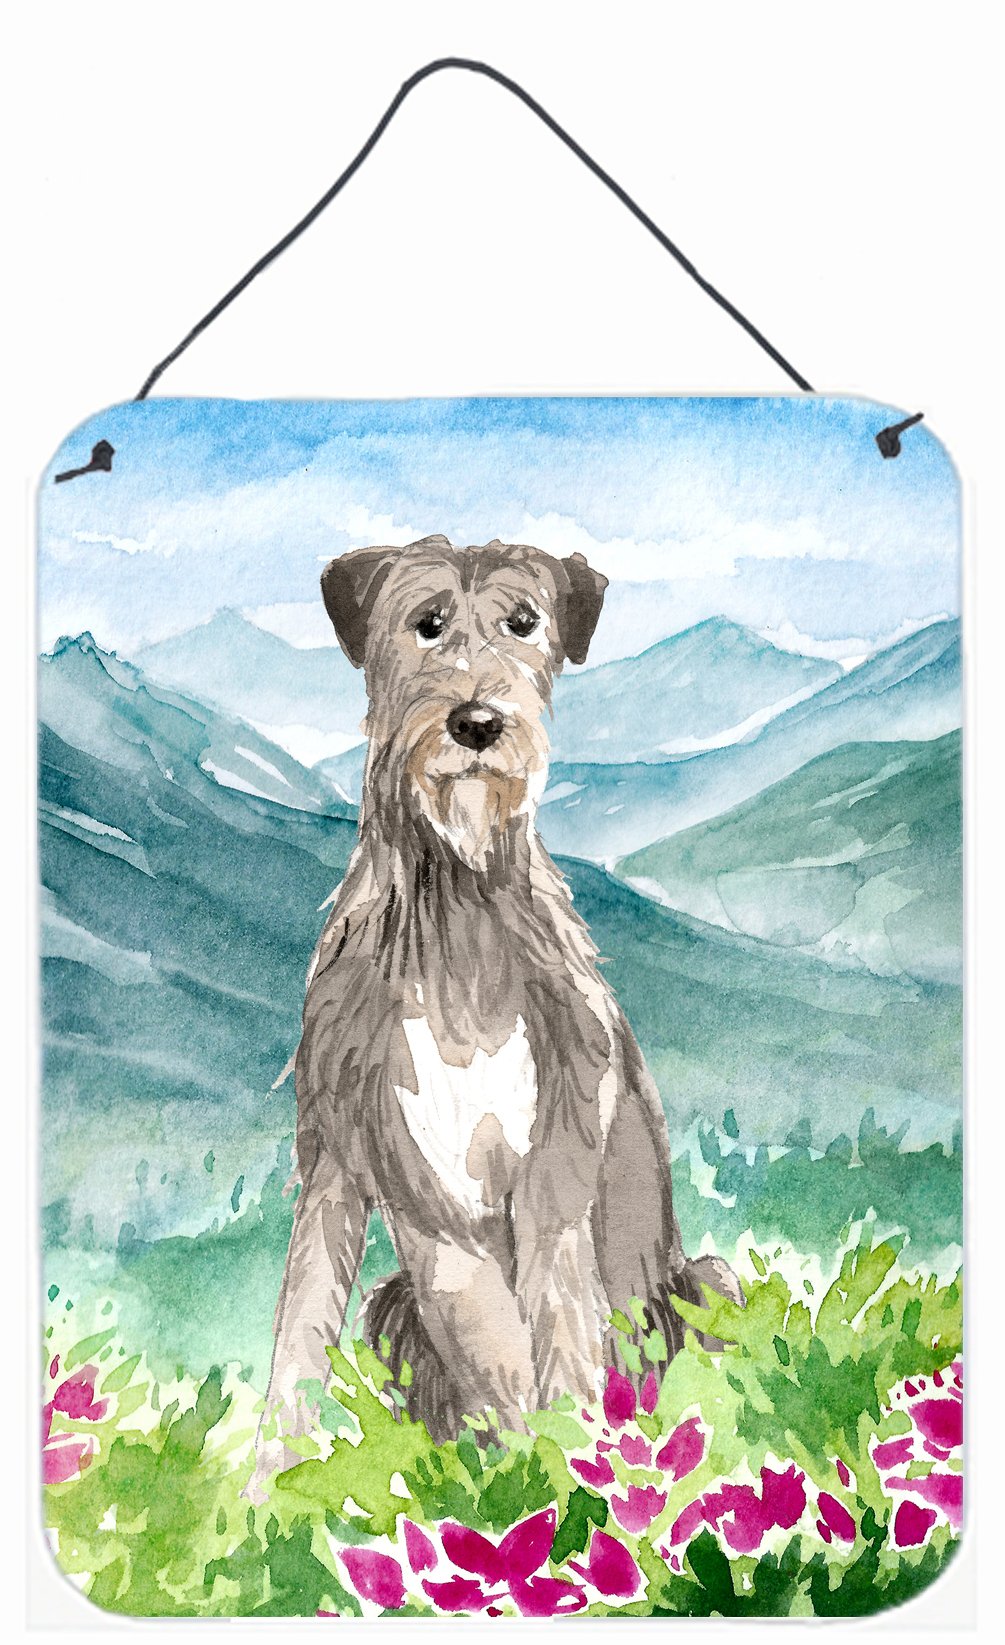 Mountain Flowers Irish Wolfhound Wall or Door Hanging Prints CK2534DS1216 by Caroline's Treasures